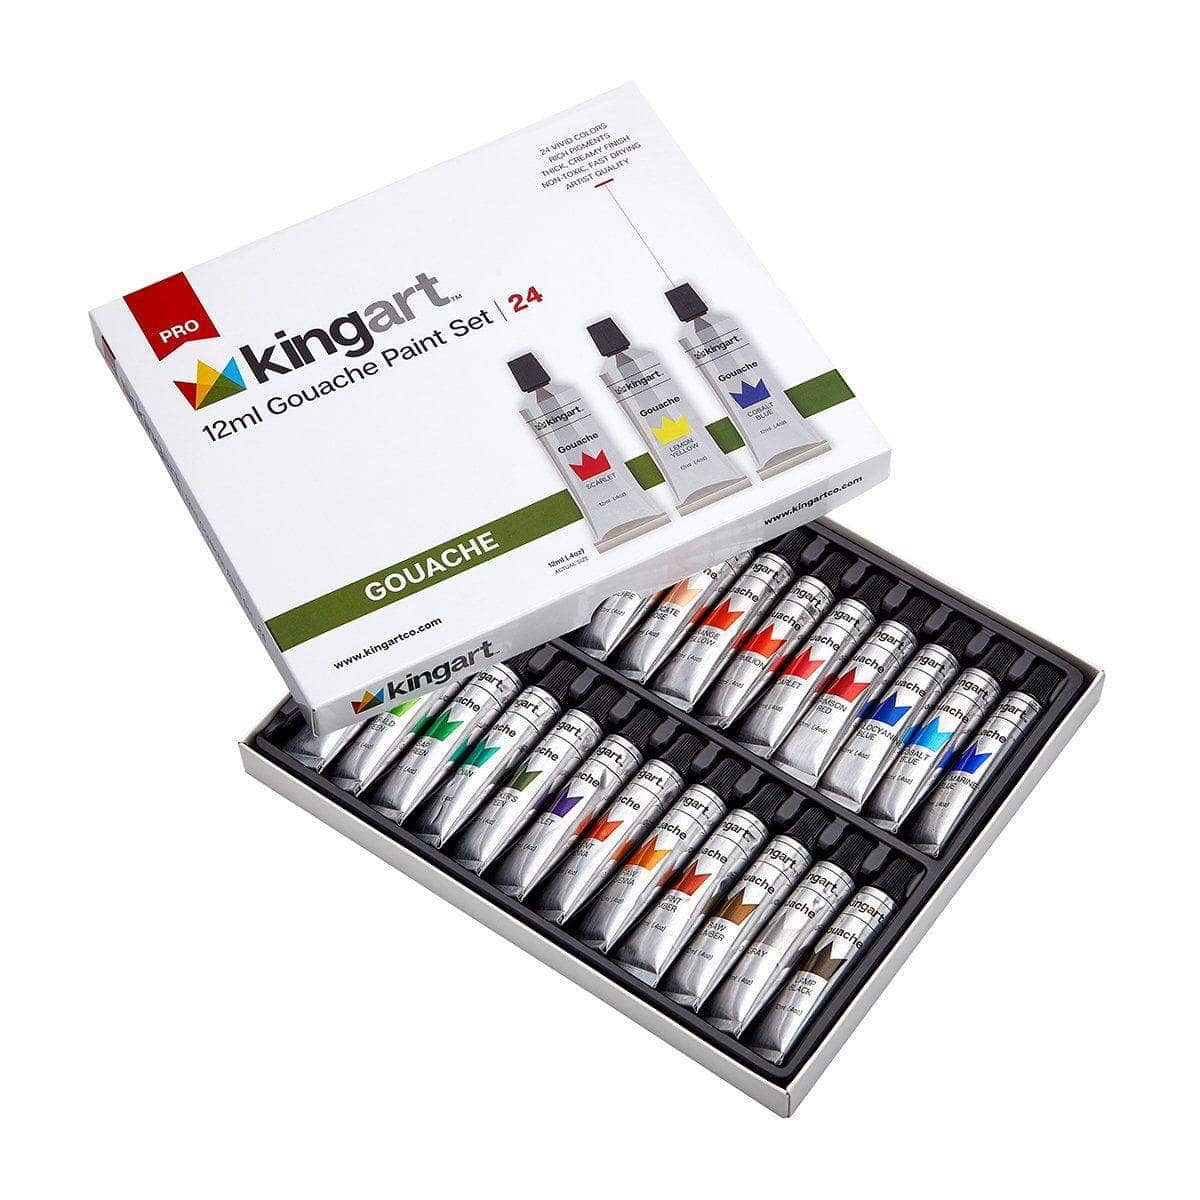 12 Colors/Set Professional Acrylic Paints Drawing Painting Pigment Acrylic  Paint Color Set Paint Pigment for Artists